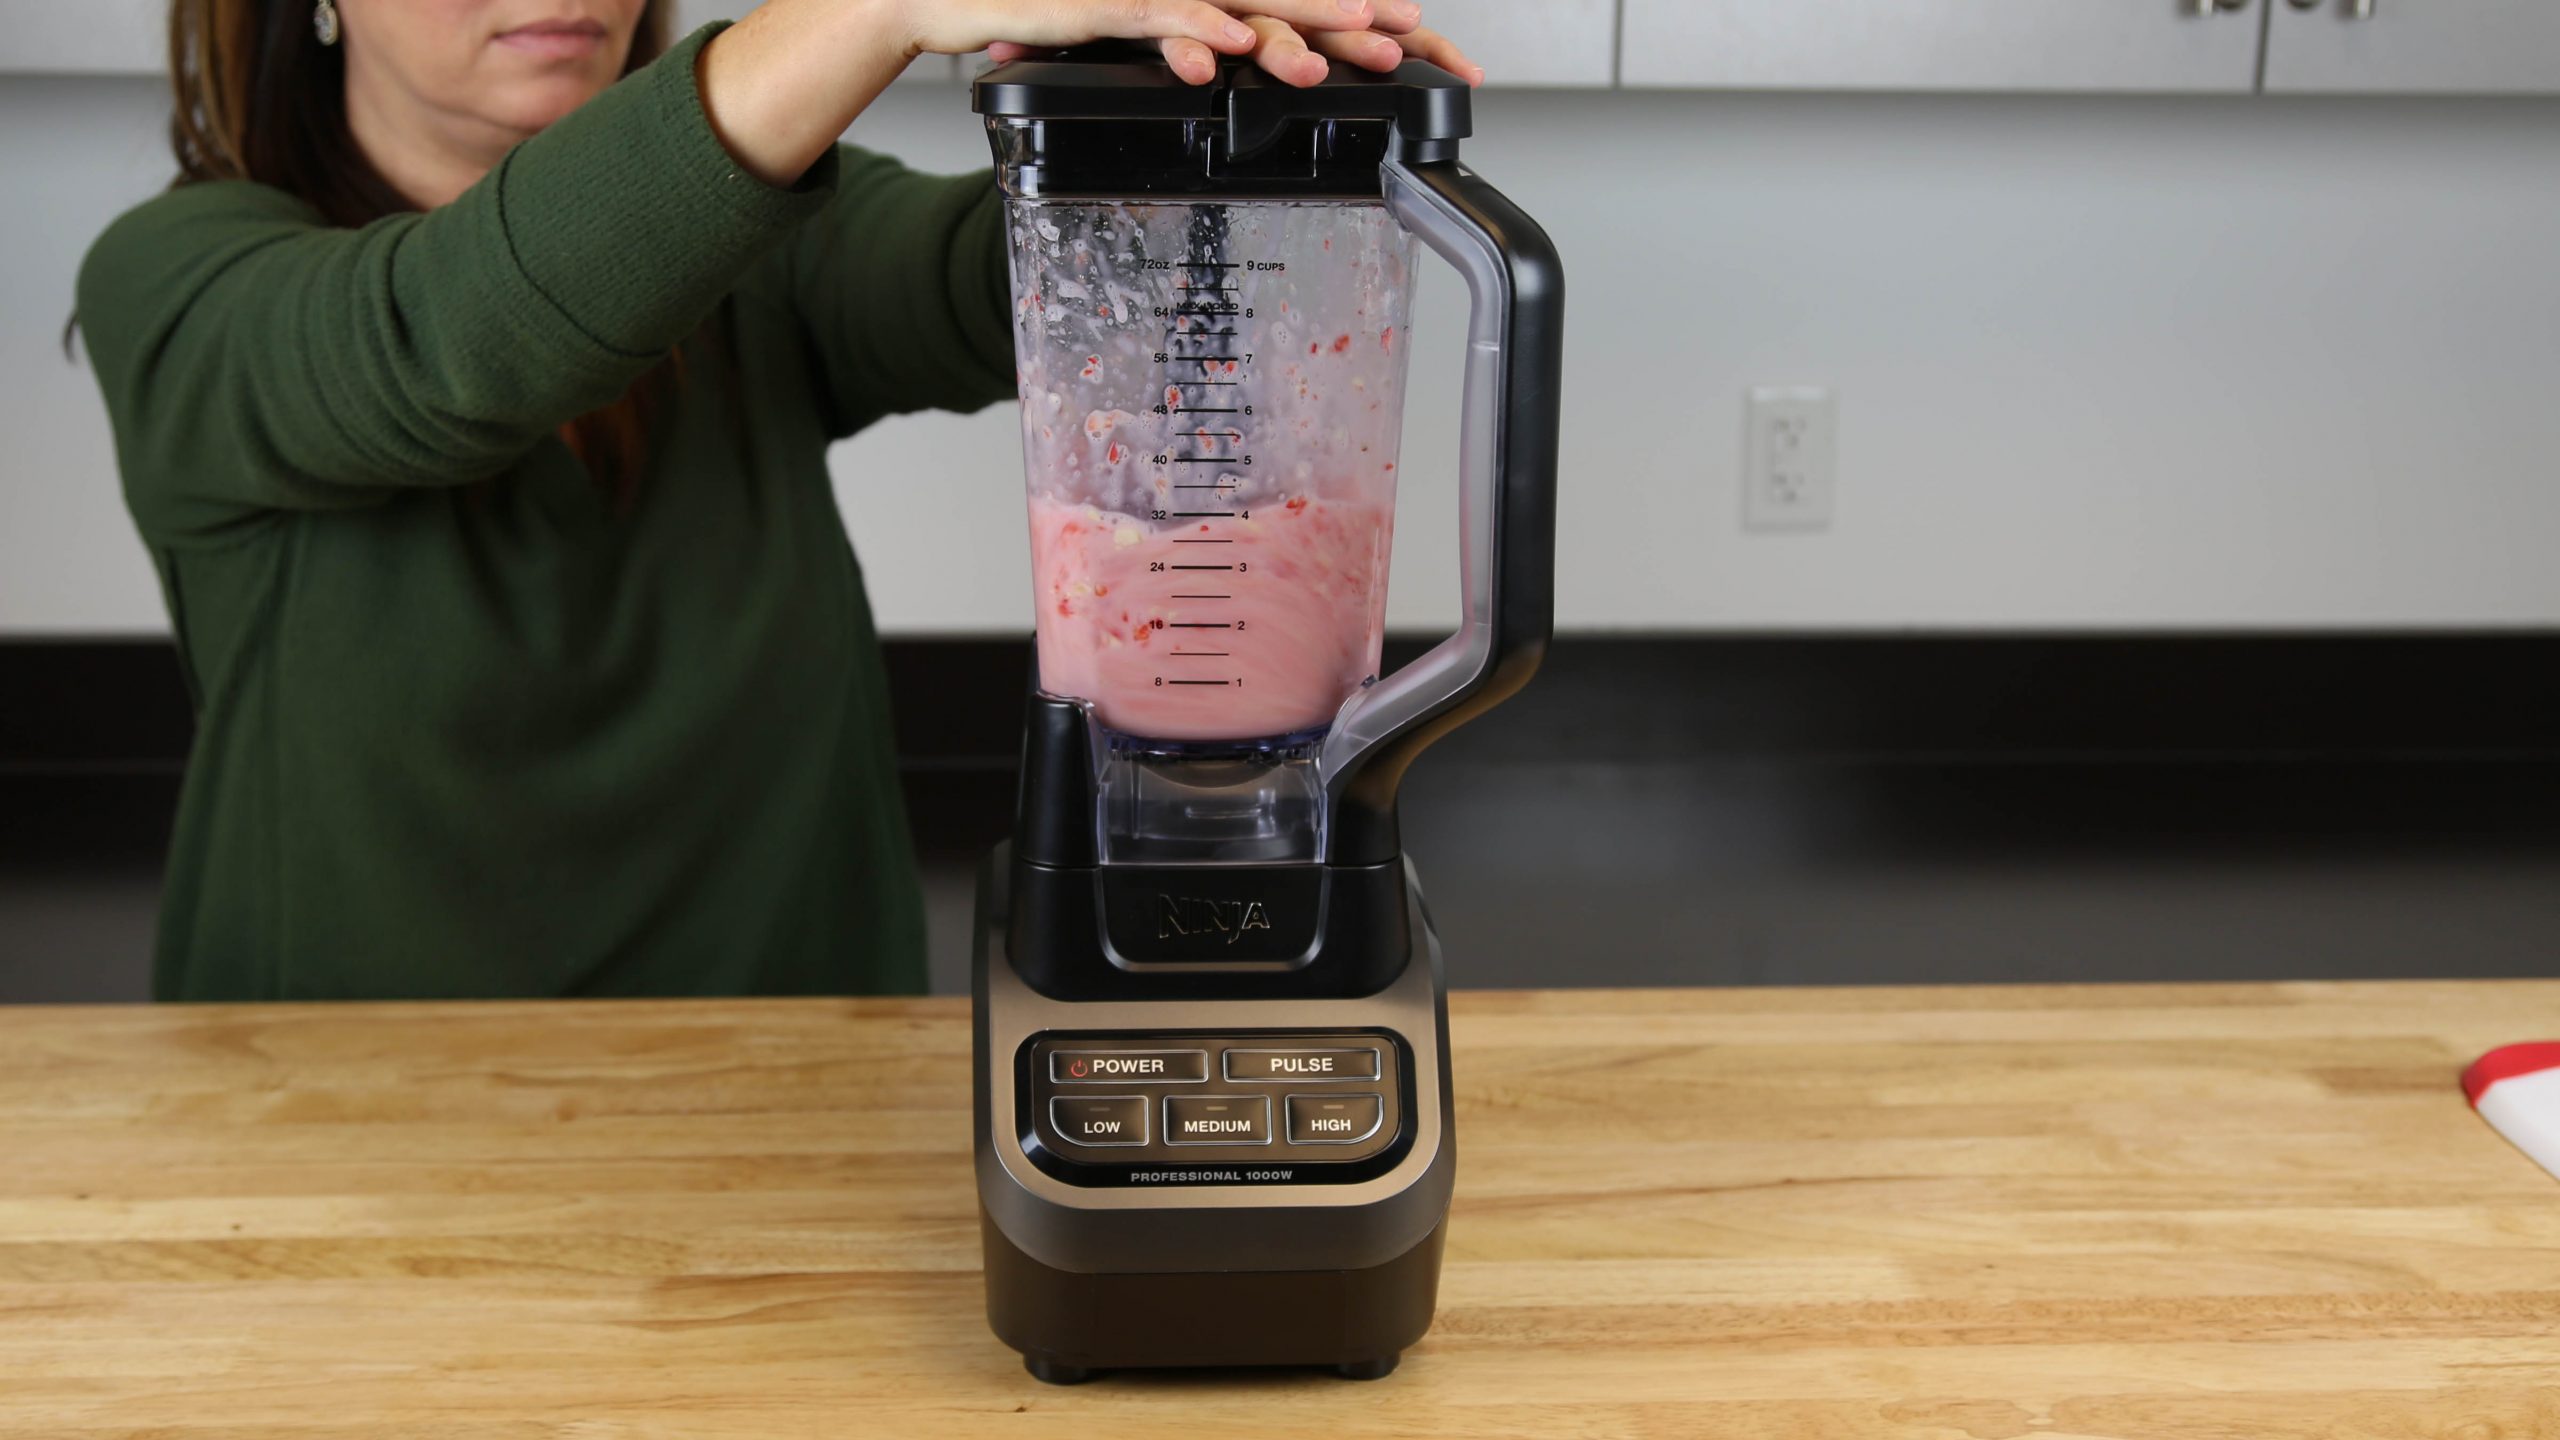 https://www.dontwasteyourmoney.com/wp-content/uploads/2022/04/blenders-for-protein-shakes-ninja-bl610-dishwasher-safe-pitcher-blender-for-protein-shakes-blend-review-ub-1-scaled.jpg